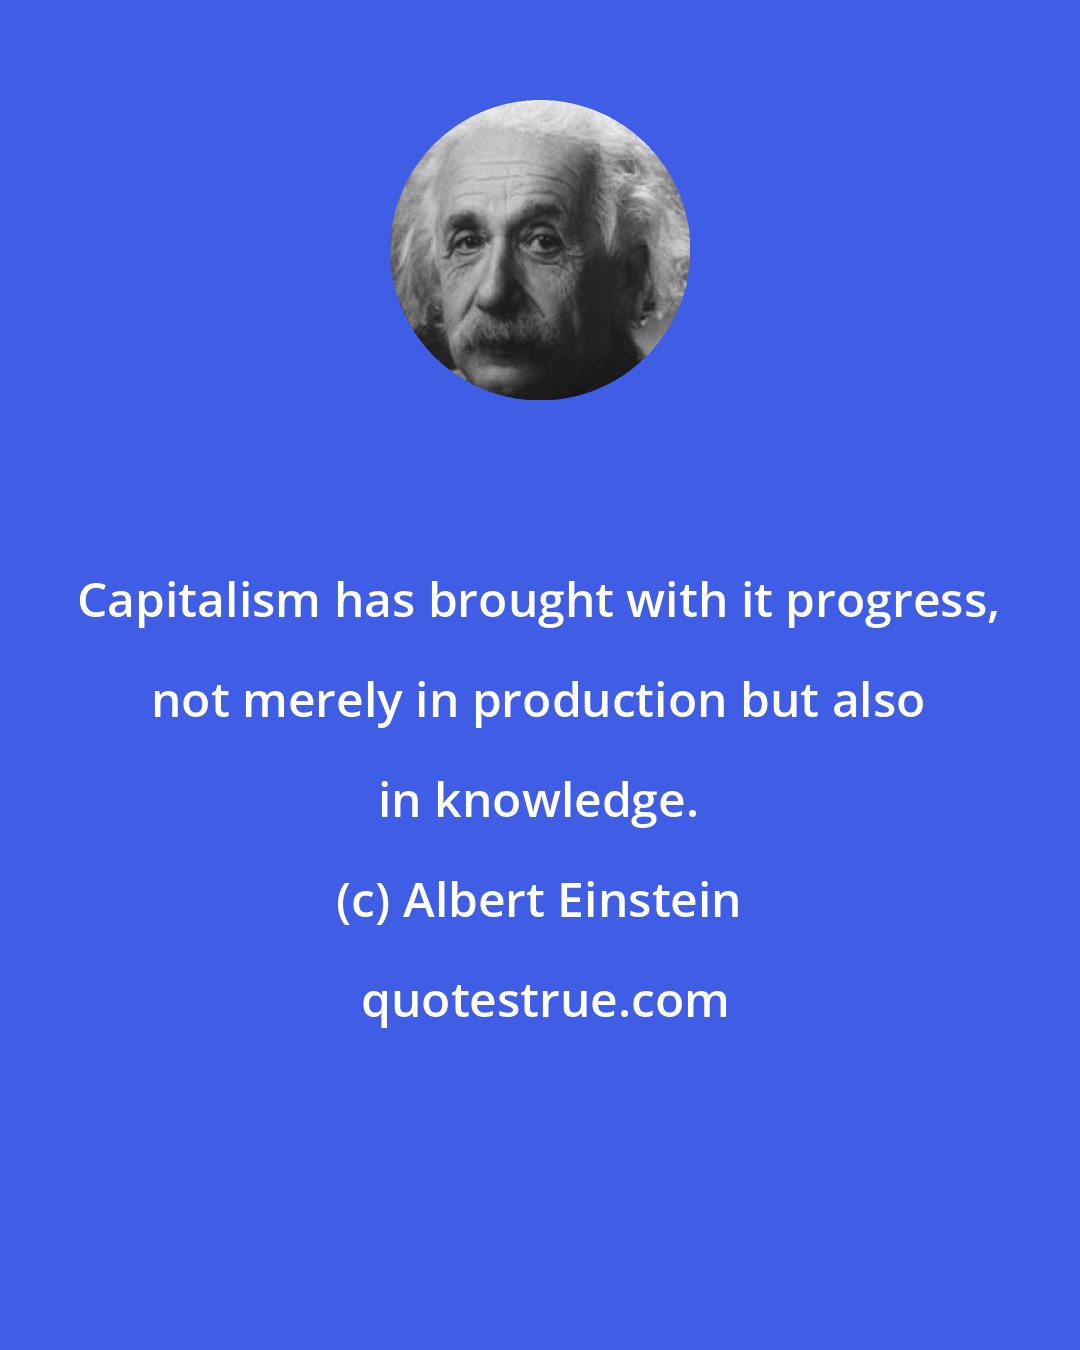 Albert Einstein: Capitalism has brought with it progress, not merely in production but also in knowledge.